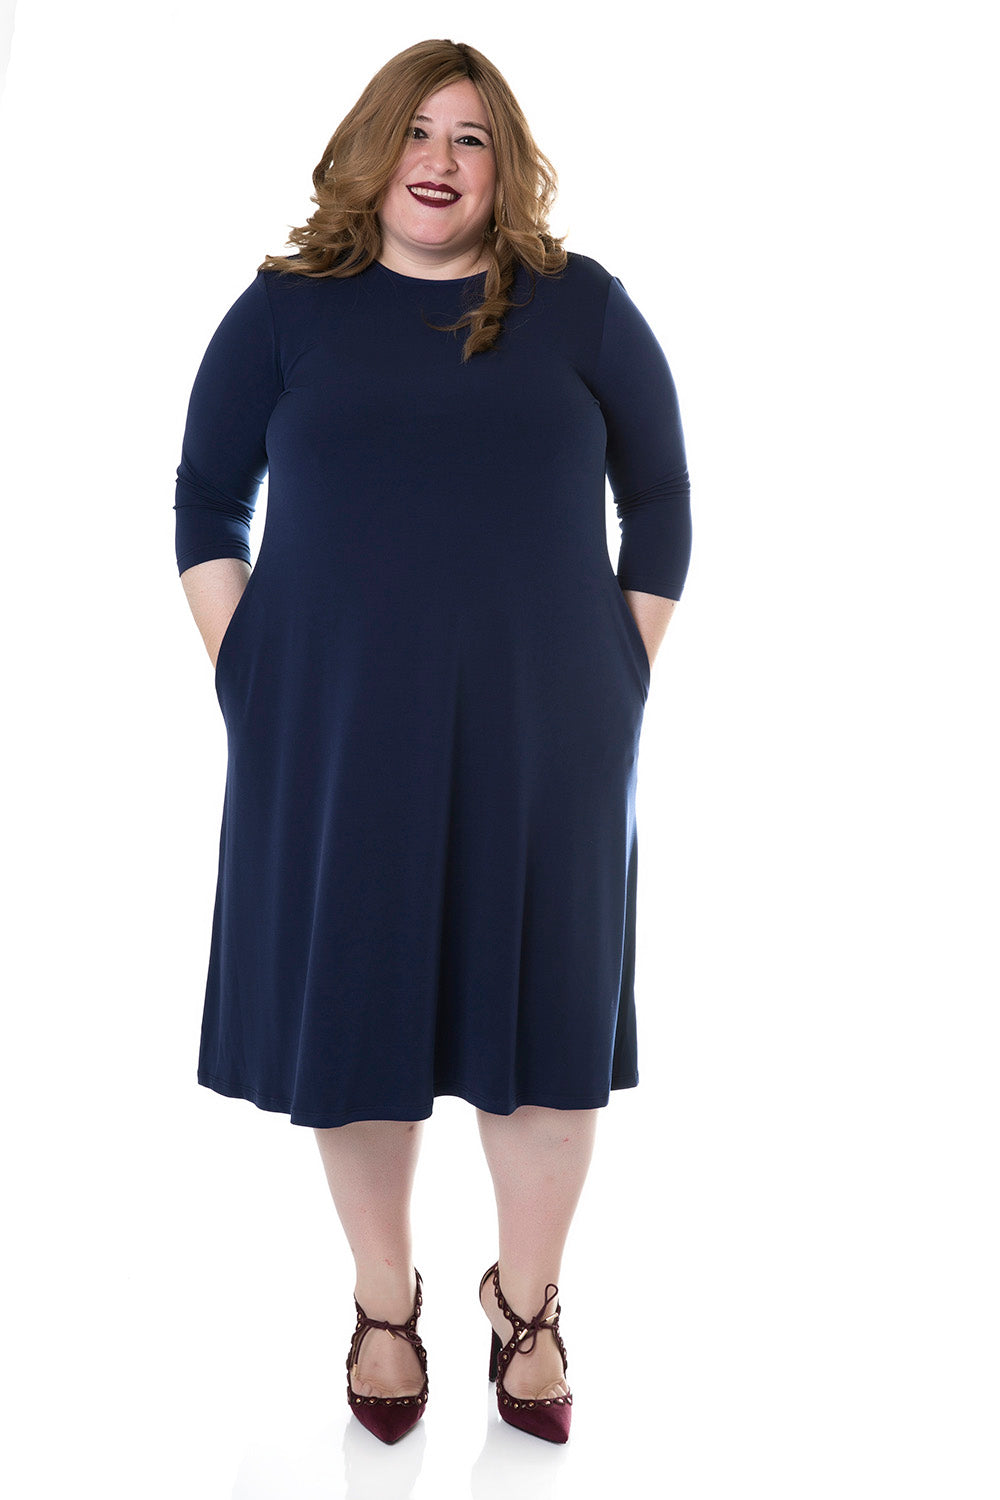 Esteez TAMMEE Dress - Womens Classic Fit and Flare Dress with pockets - NAVY